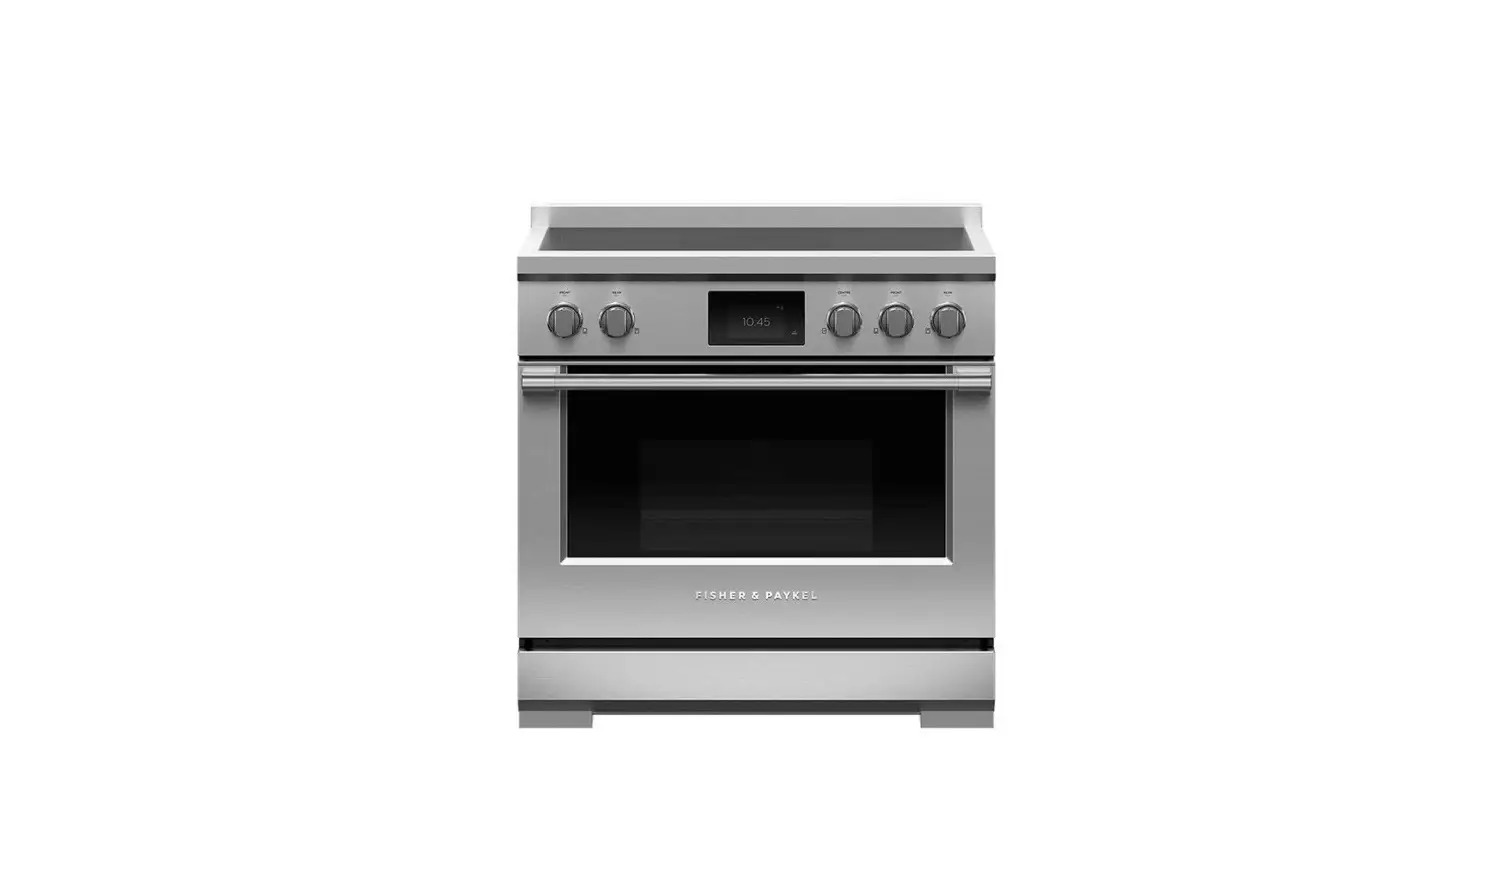 RIV3-365 Selfcleaning Induction Range